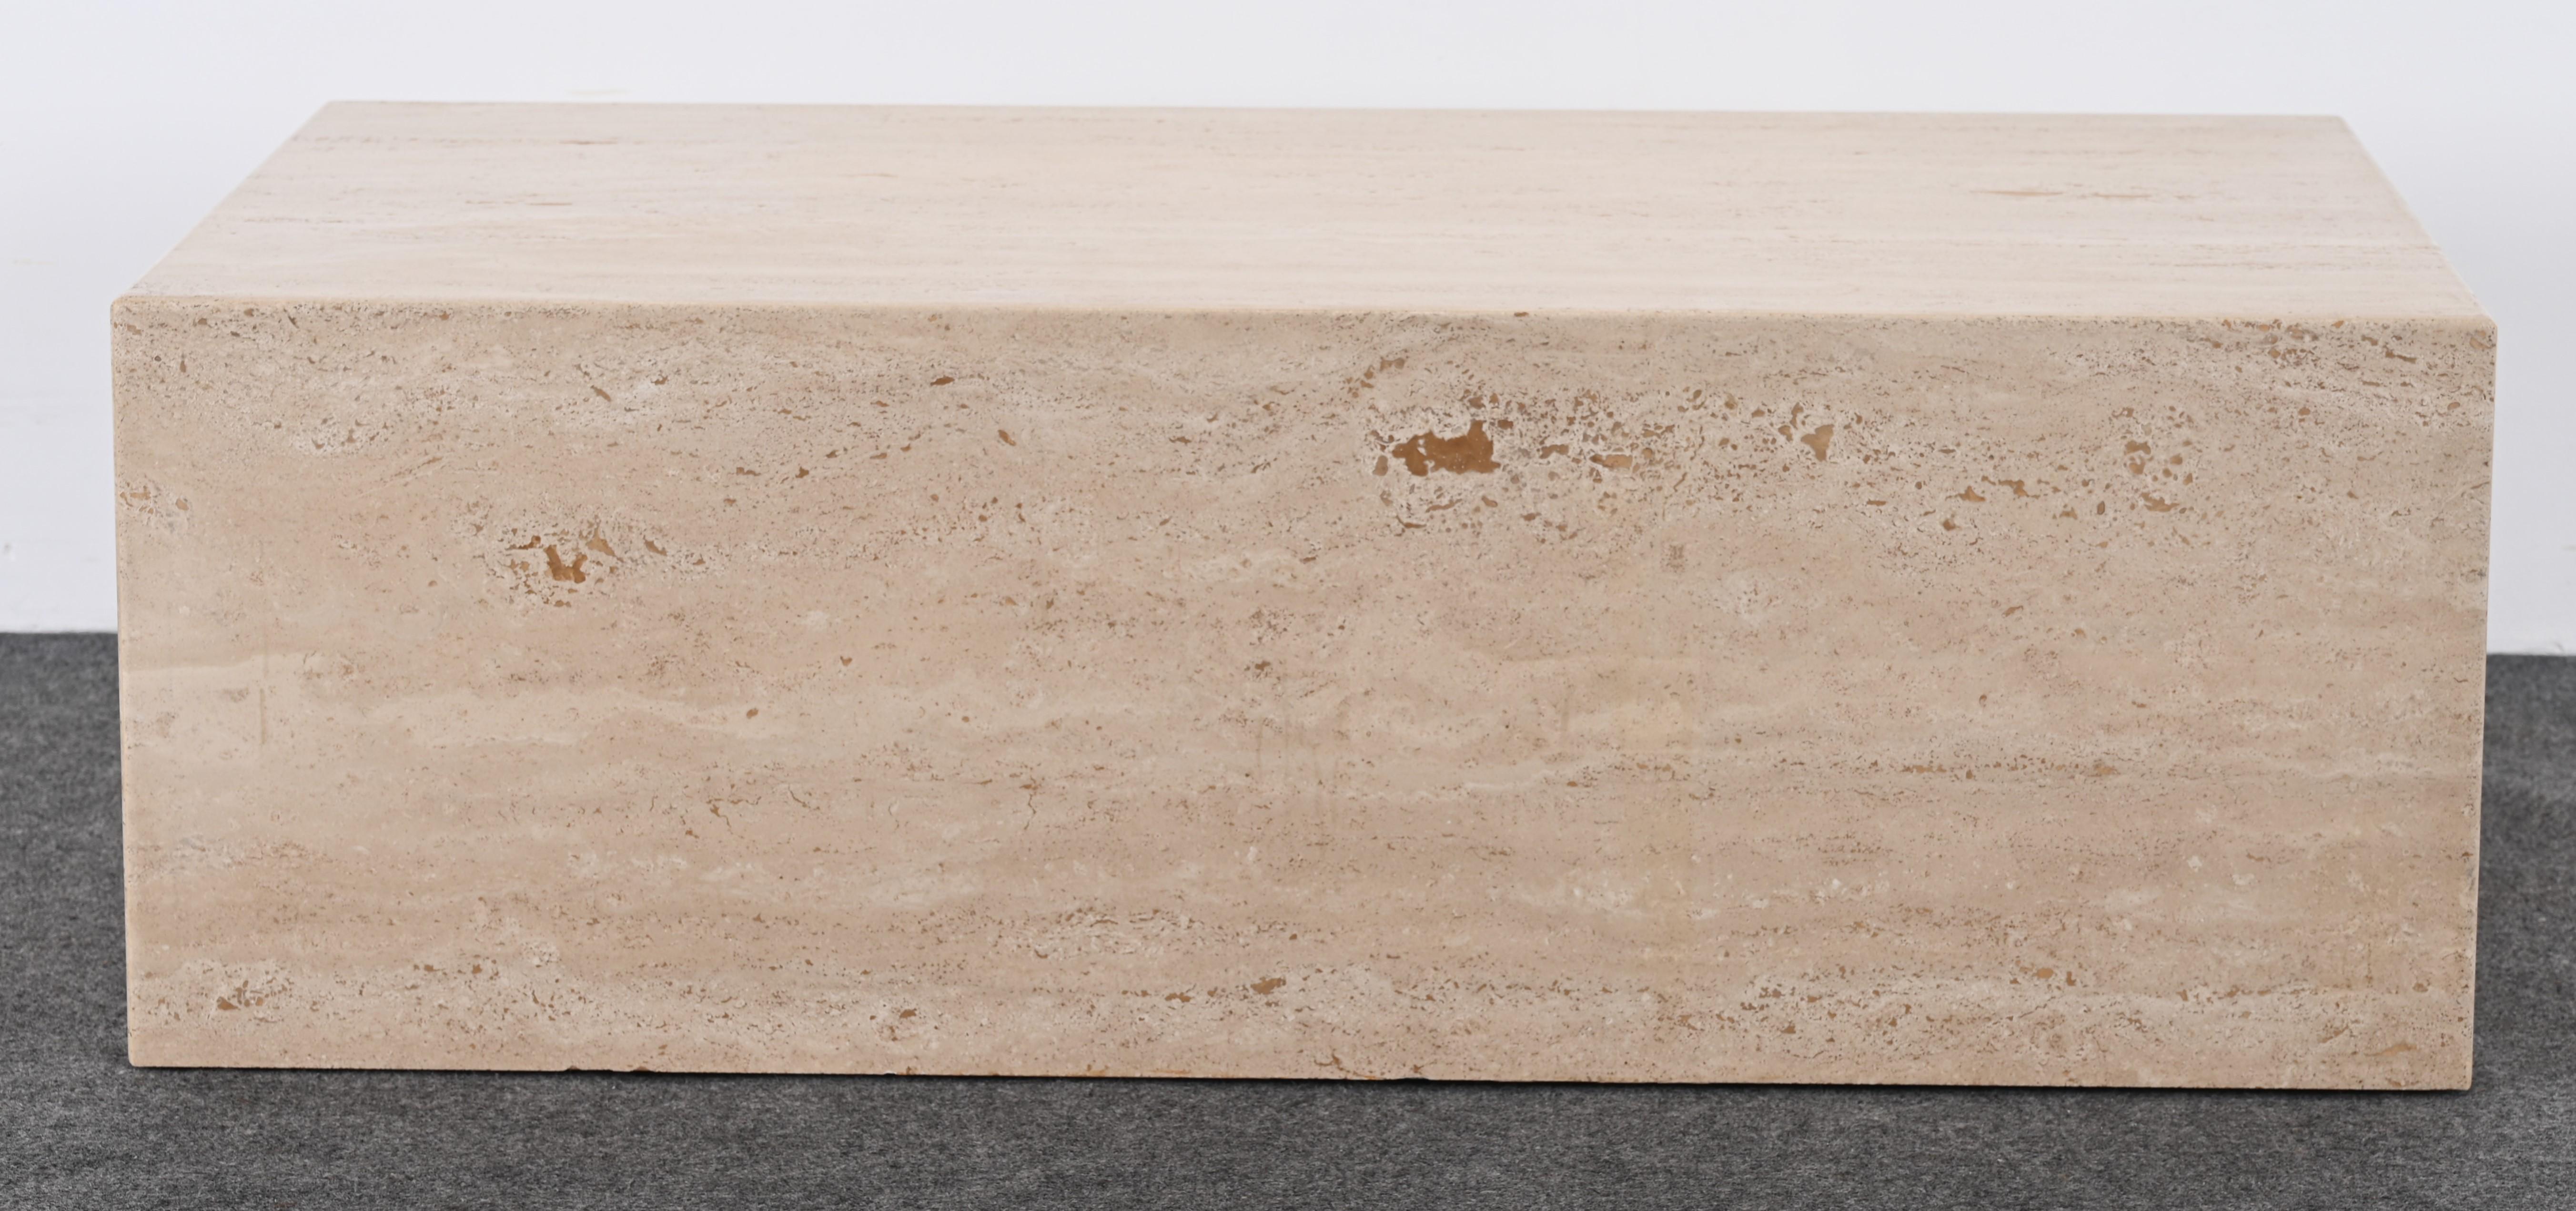 A monumental travertine marble coffee table in the style of Roche Bobois. This coffee table would look great in a contemporary setting with a focus on minimalism. Monolithic in size and scale. The natural tones and marbelized graining have an